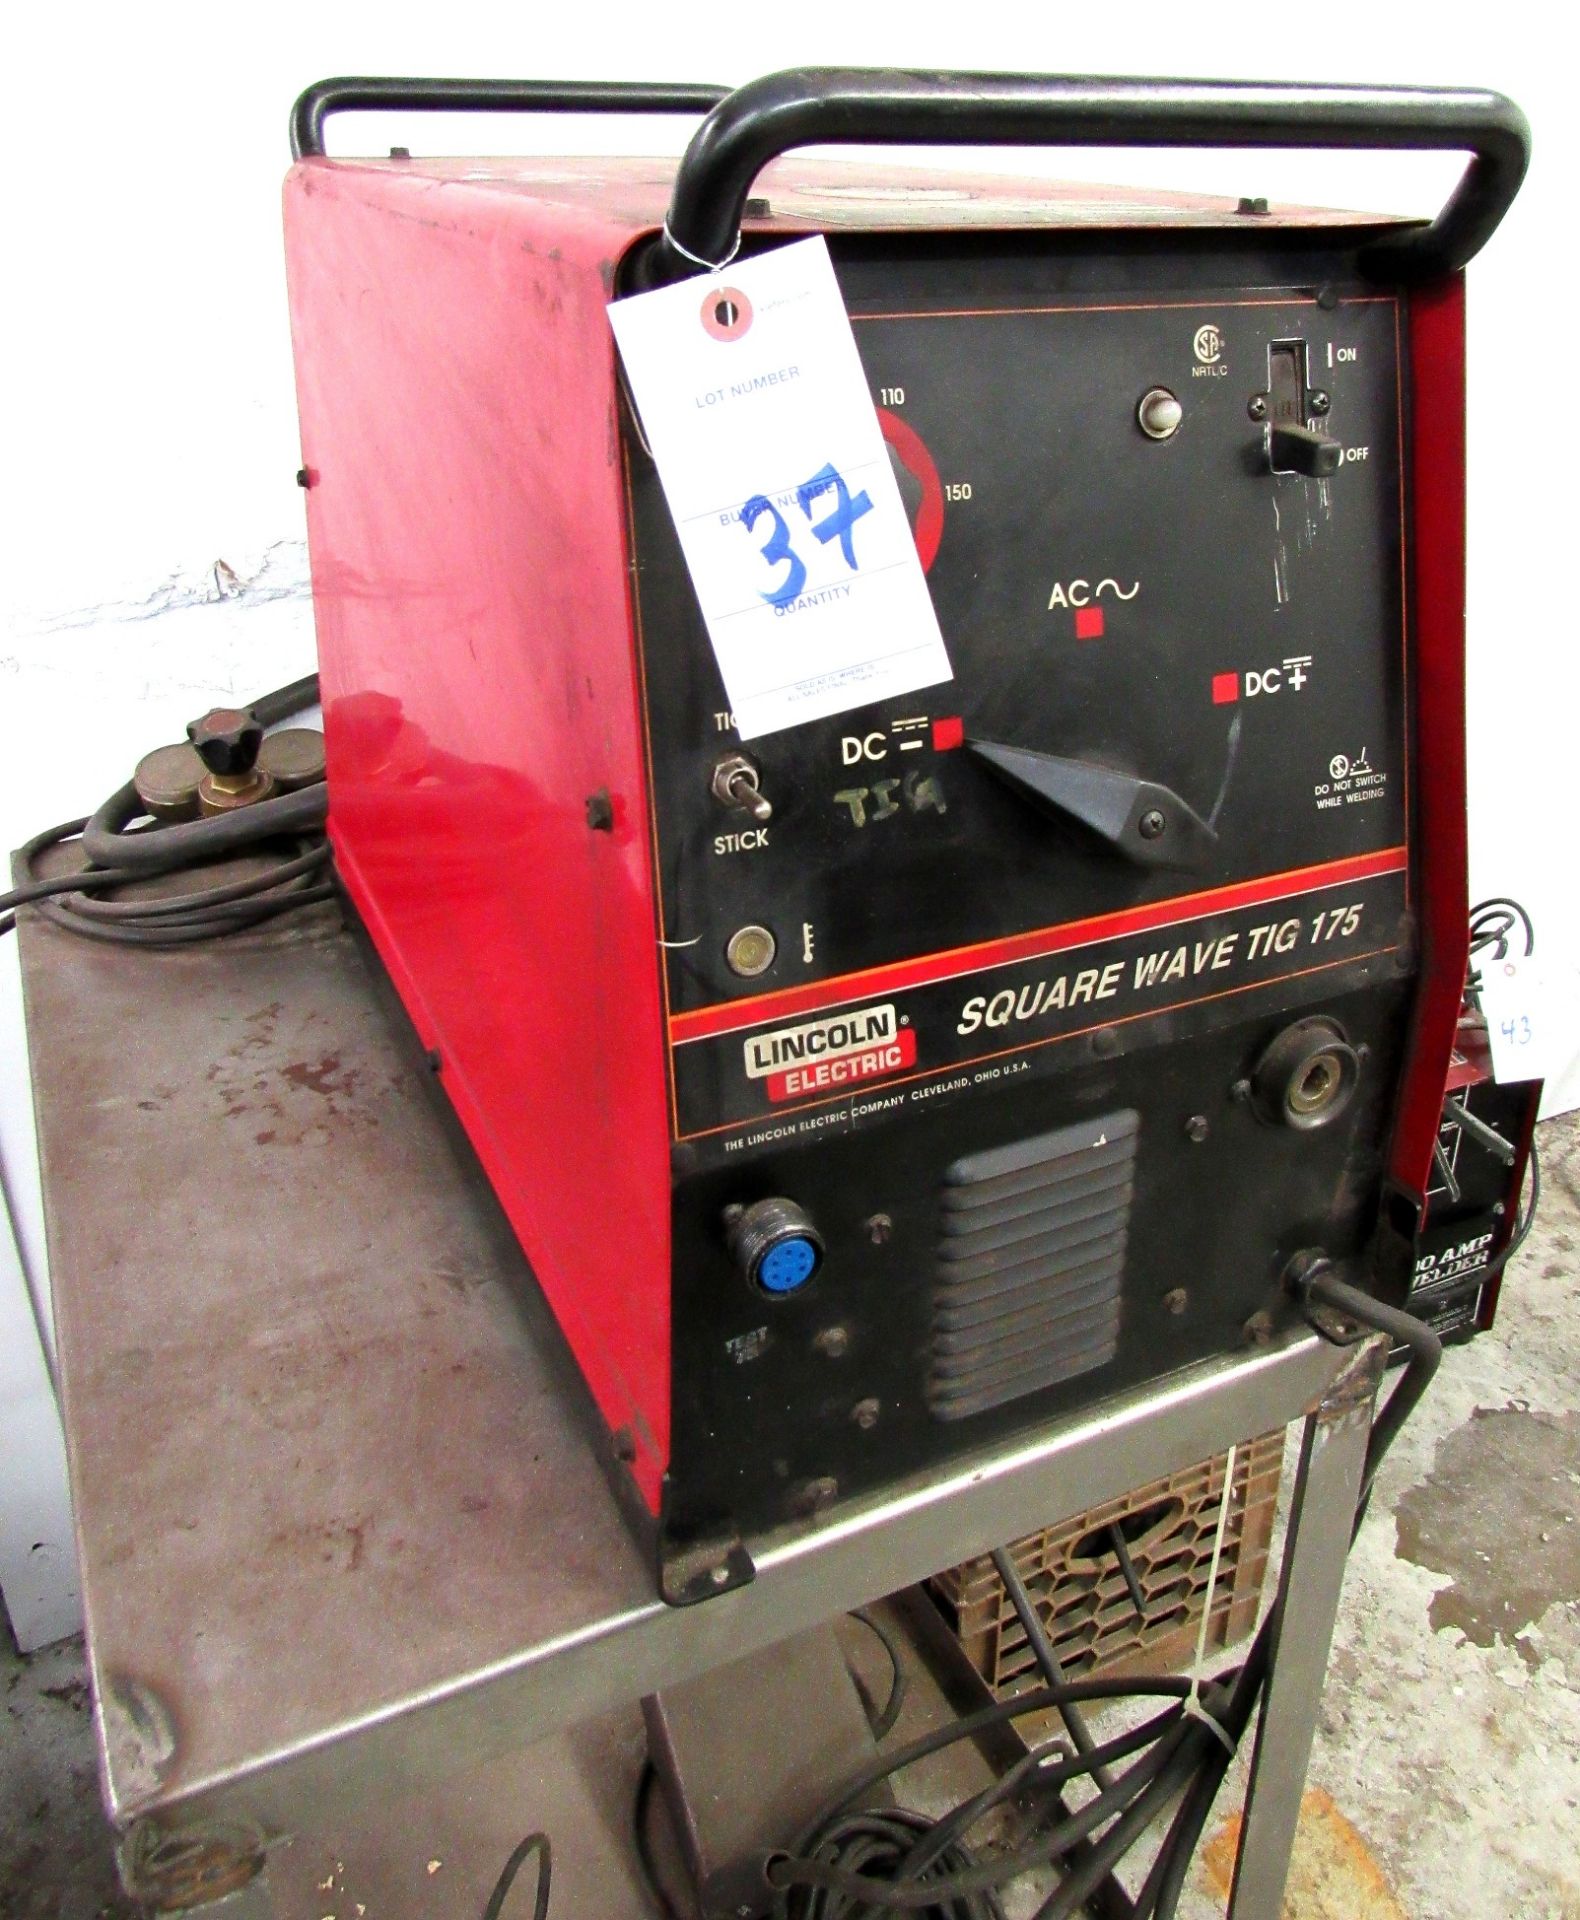 Lincoln Electric Square Wave Tig 175 AC/DC Welder - W/ Cables, TIG Gun, Foot Switch